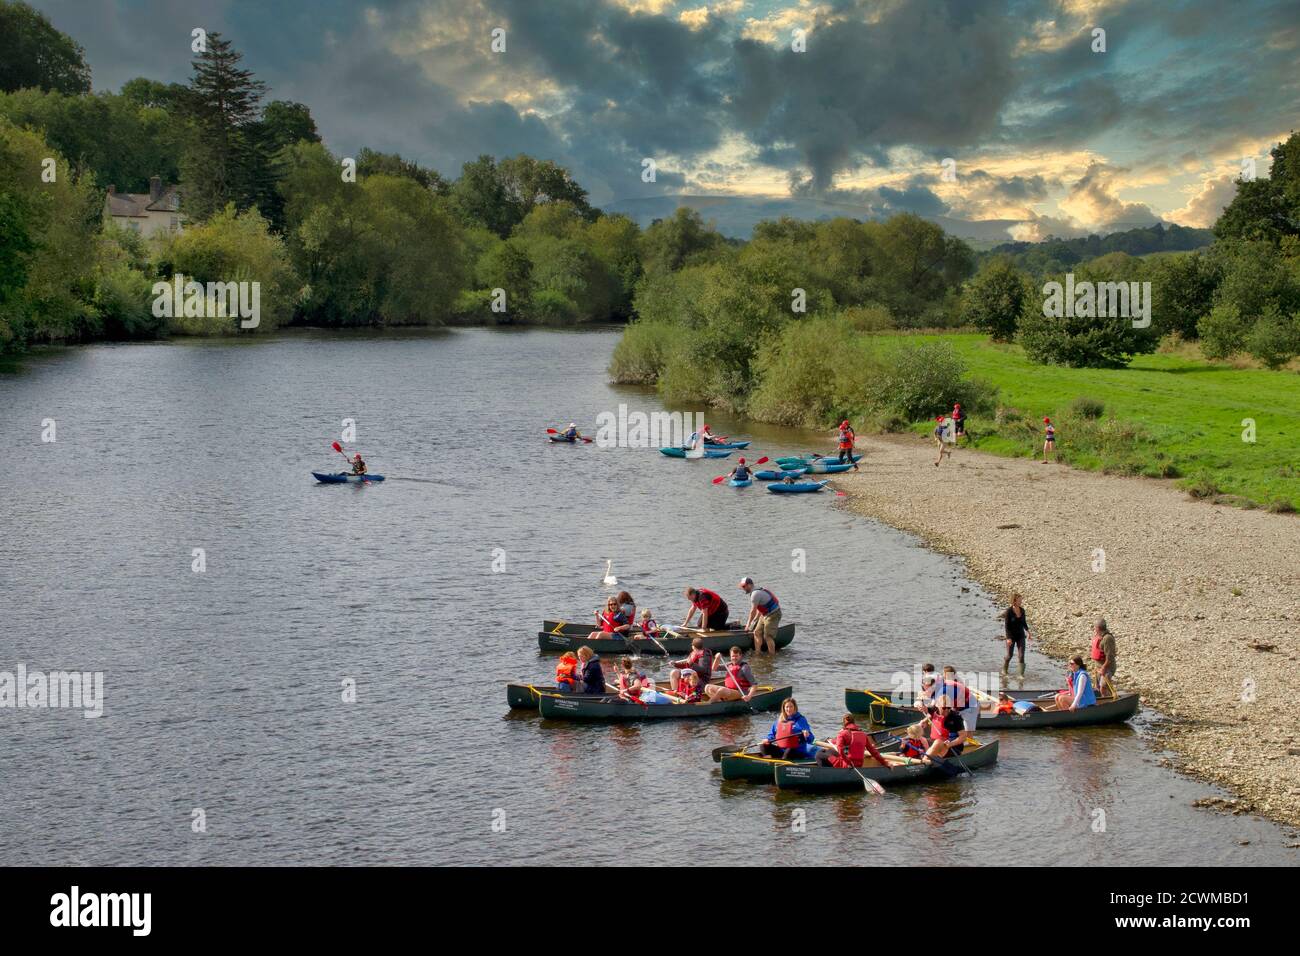 River and adventure sports on the River Wye at Glasbury, Powys, Wales., UK Stock Photo